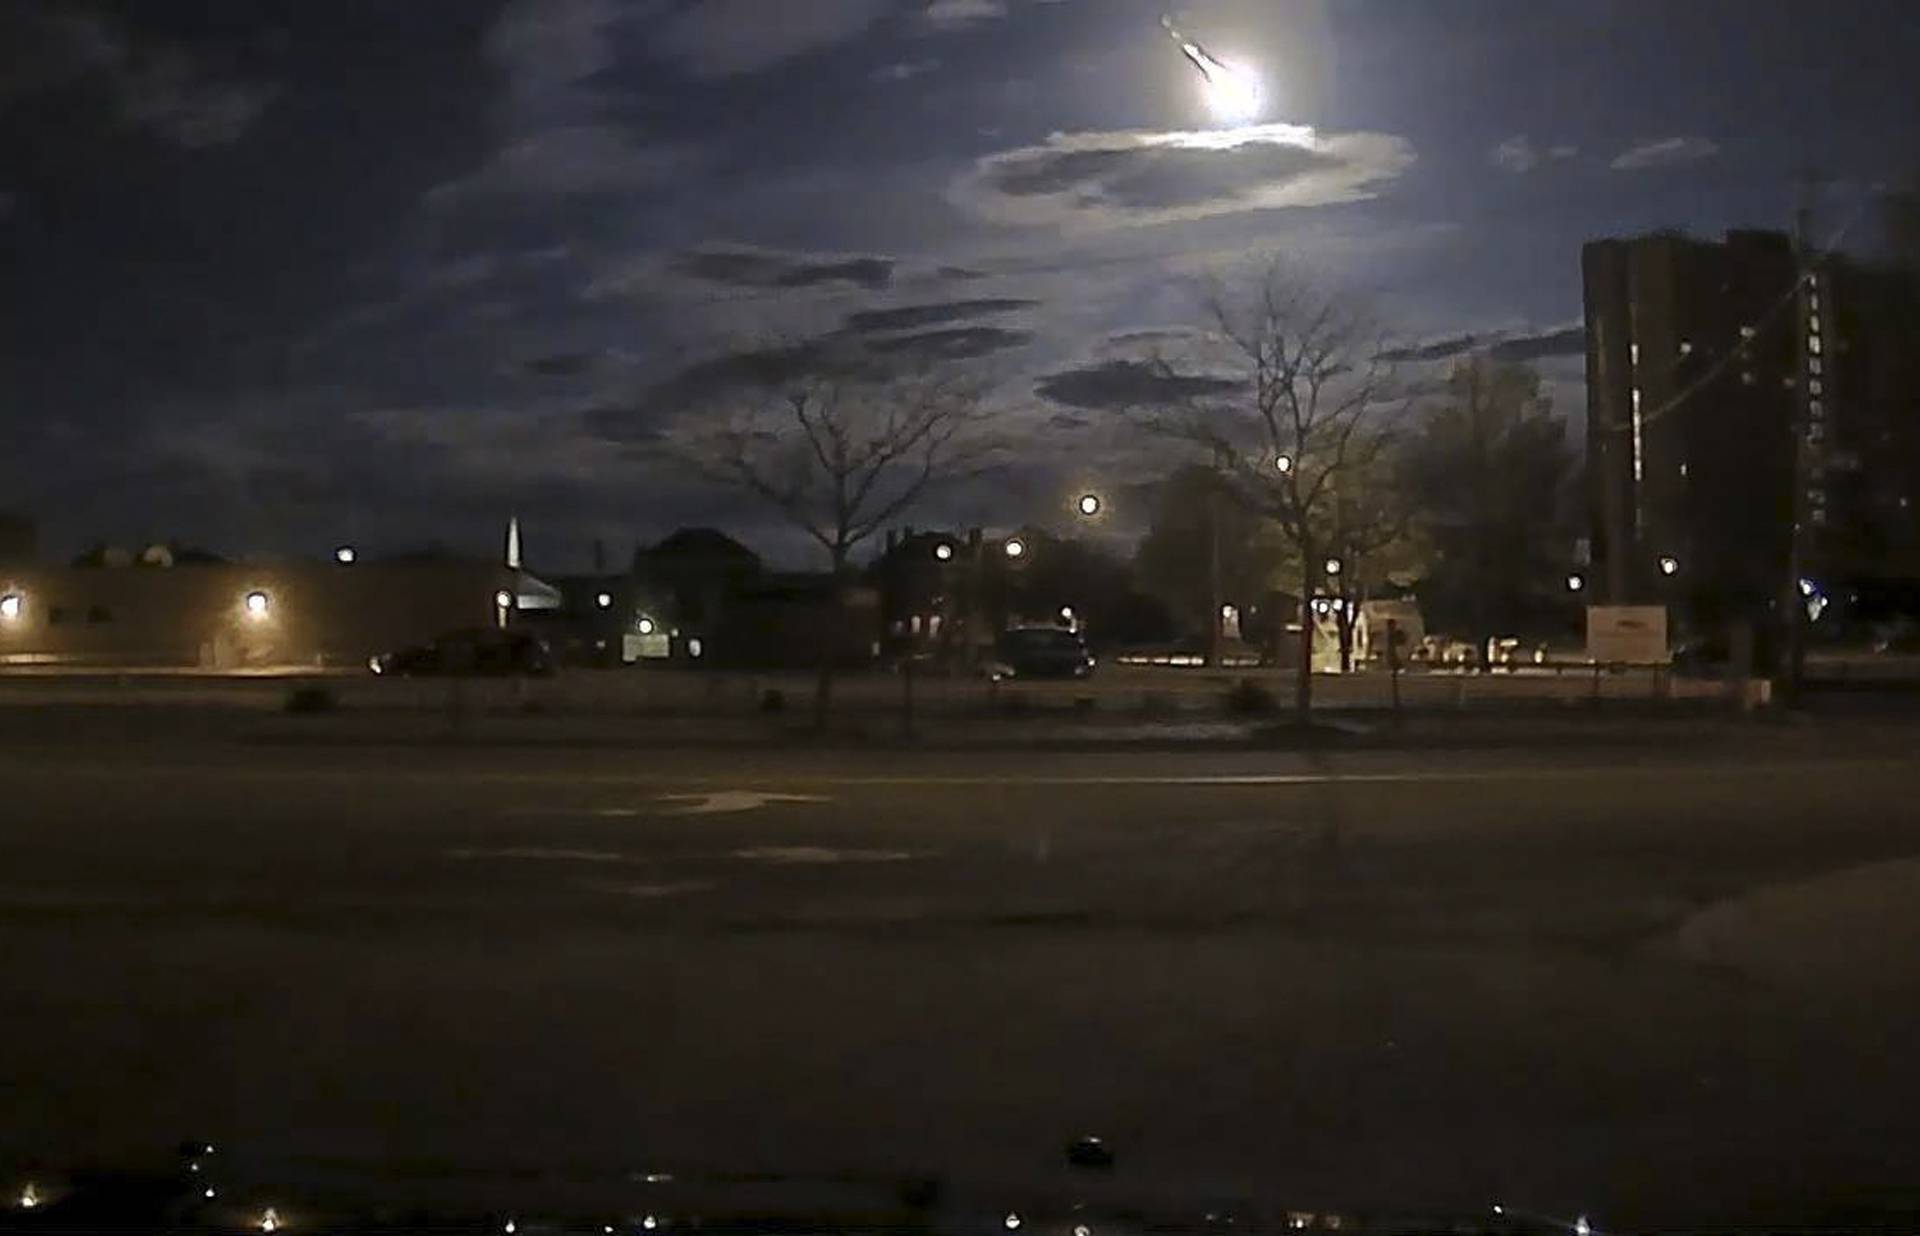 Portland Maine Police Department image of a meteor streaking across the sky early morning in Portland Maine